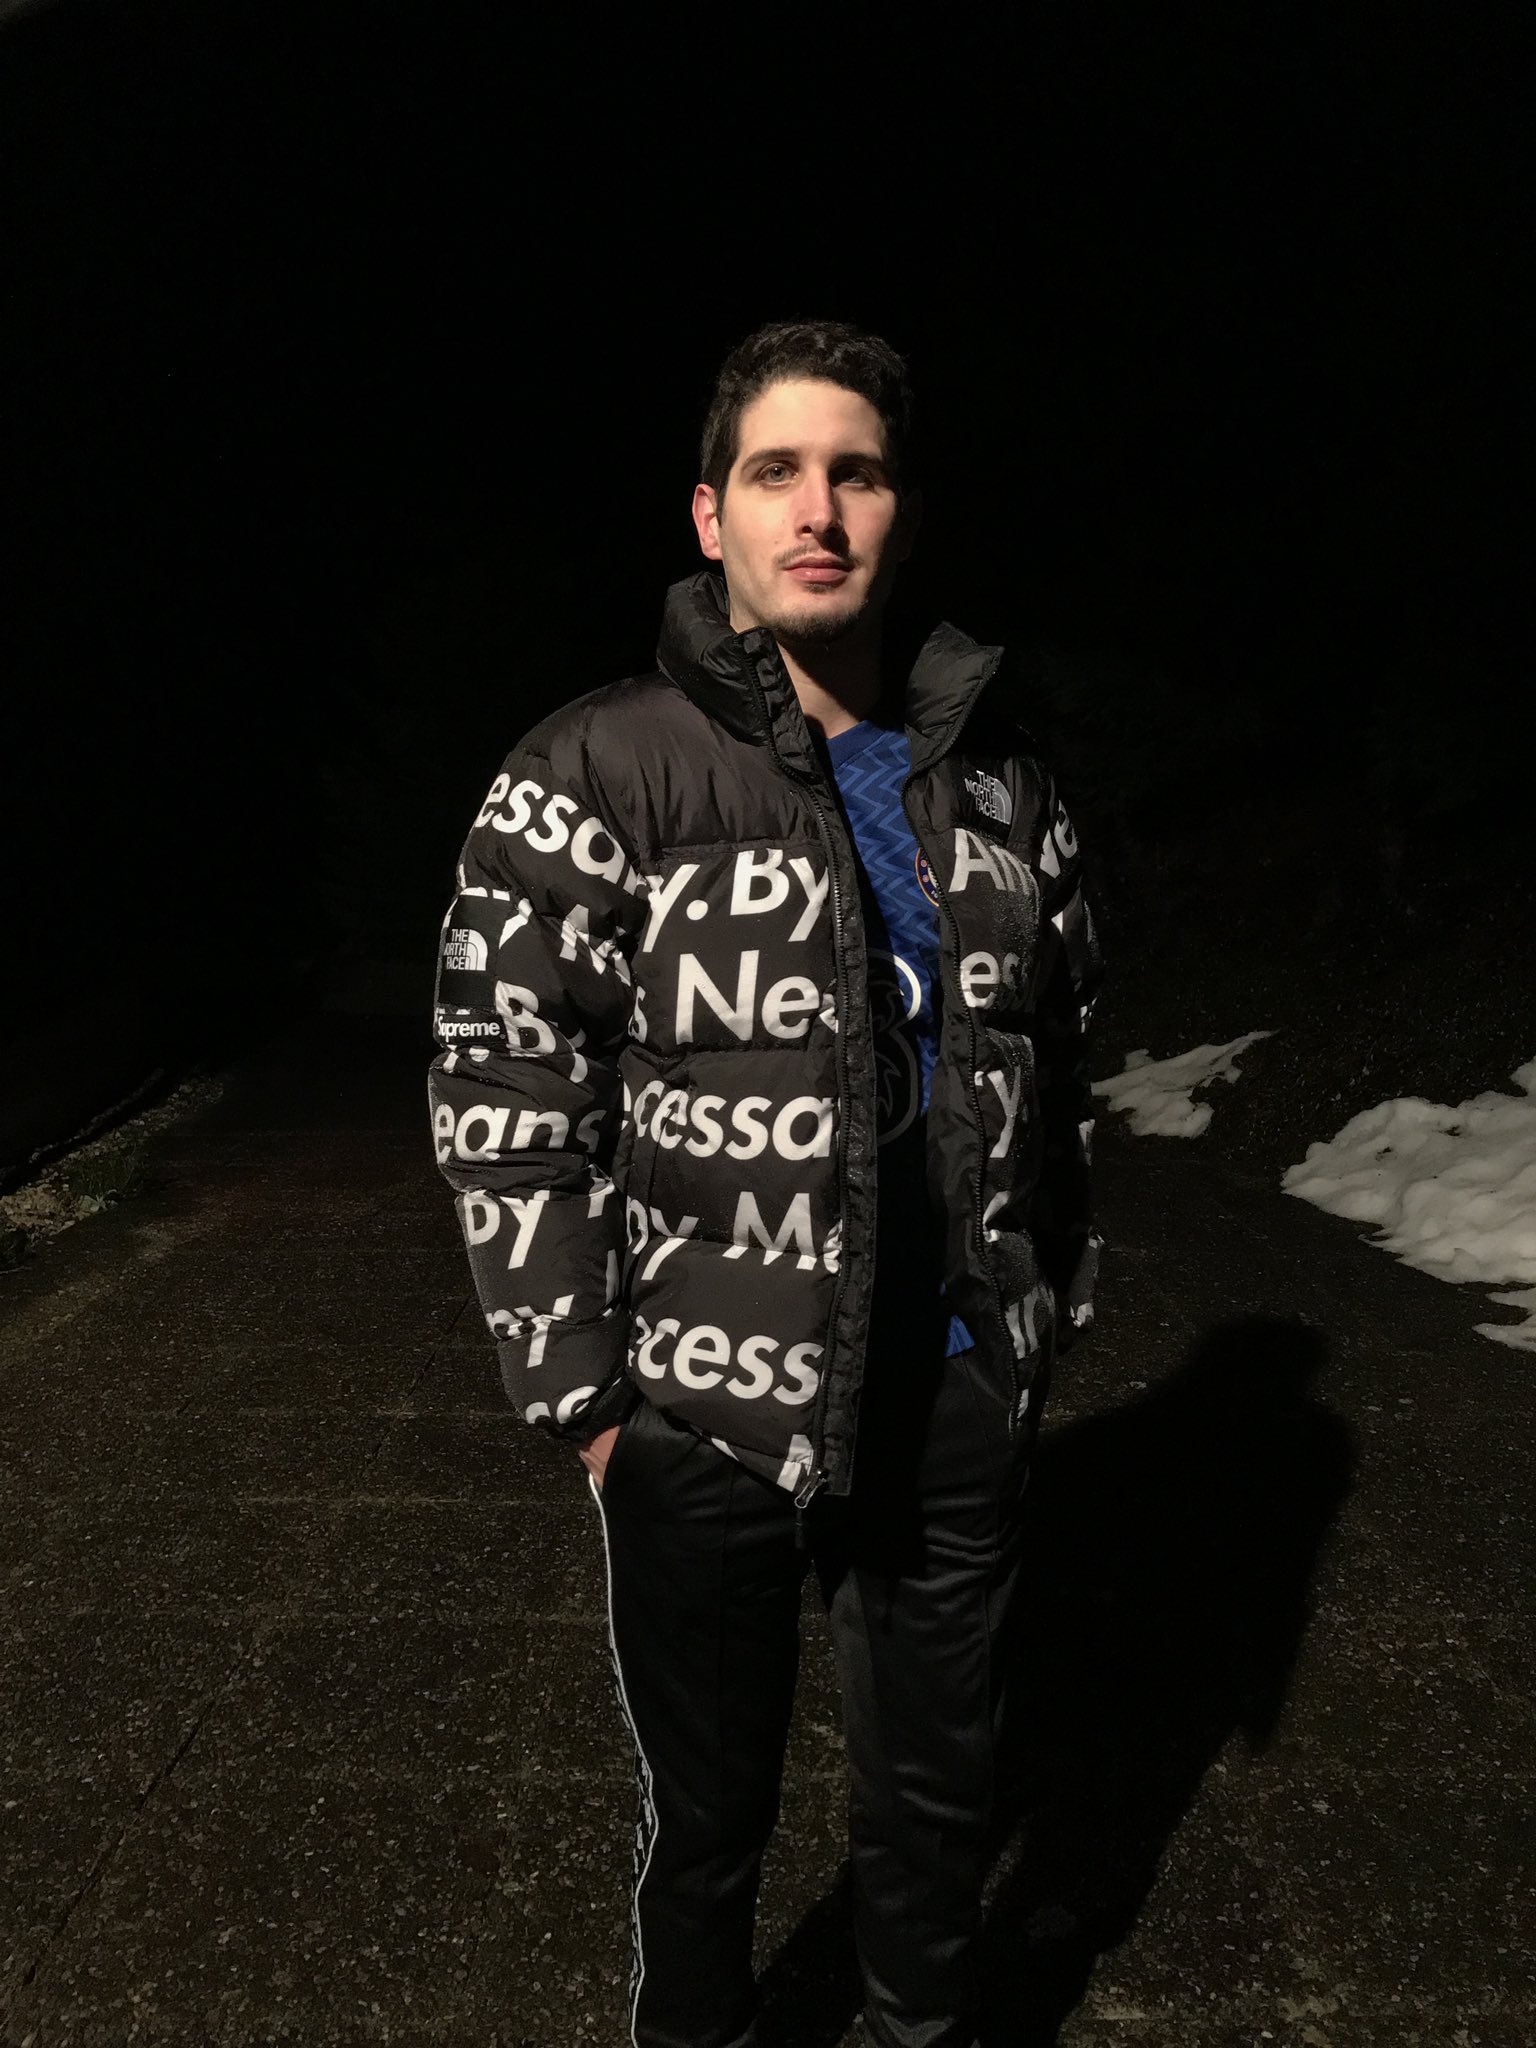 bossen Zuidoost homoseksueel Philippe on Twitter: "Supreme x The North Face 'By Any Means Necessary'  #fw15 https://t.co/eHDLxBBvS2" / Twitter